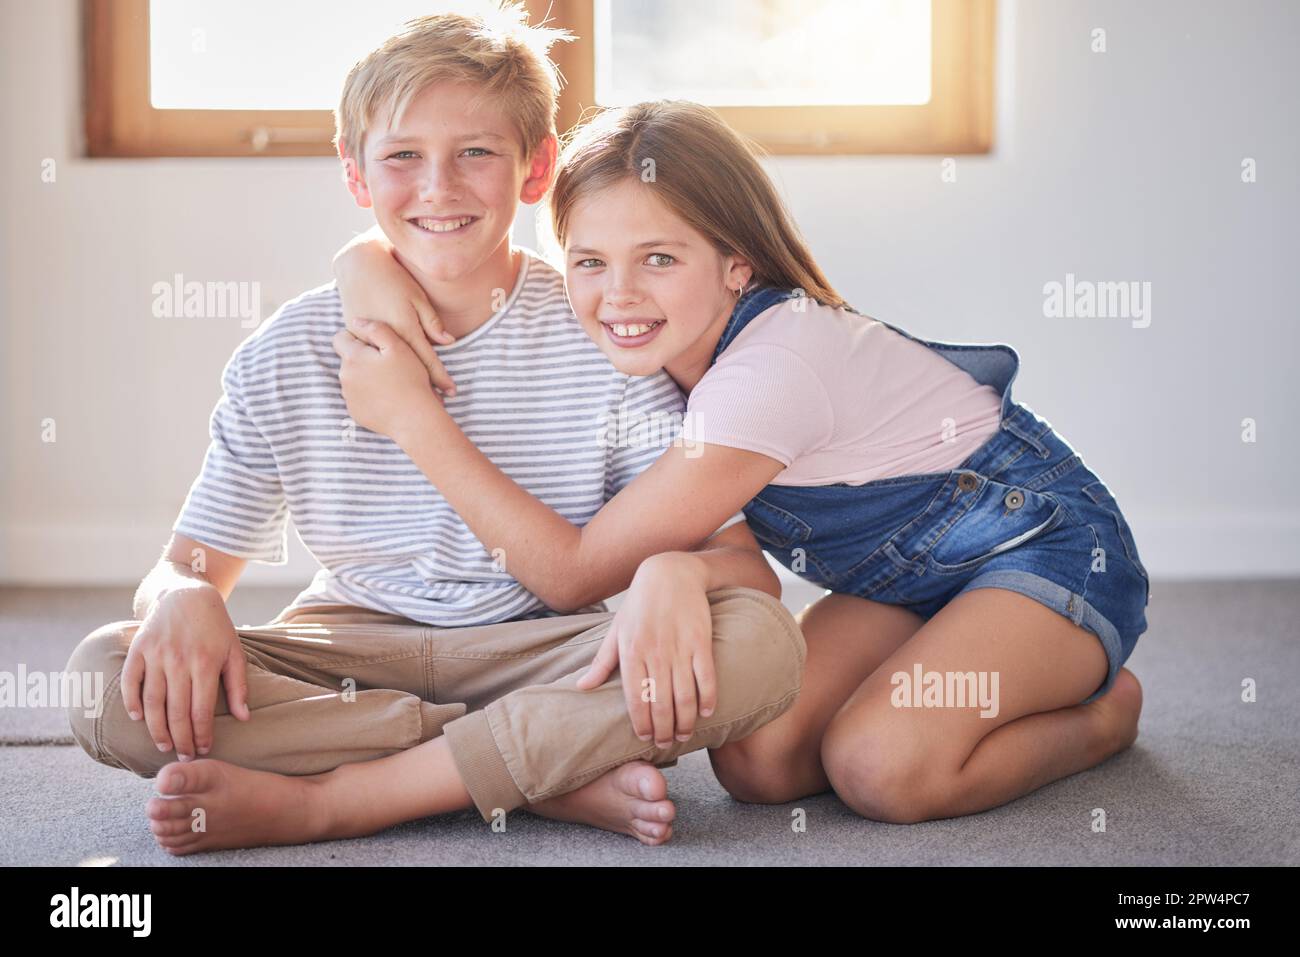 Home, kids portrait and hug of siblings or friends with youth fun and happiness together. Girl and child bonding, smiling and hugging with young frien Stock Photo